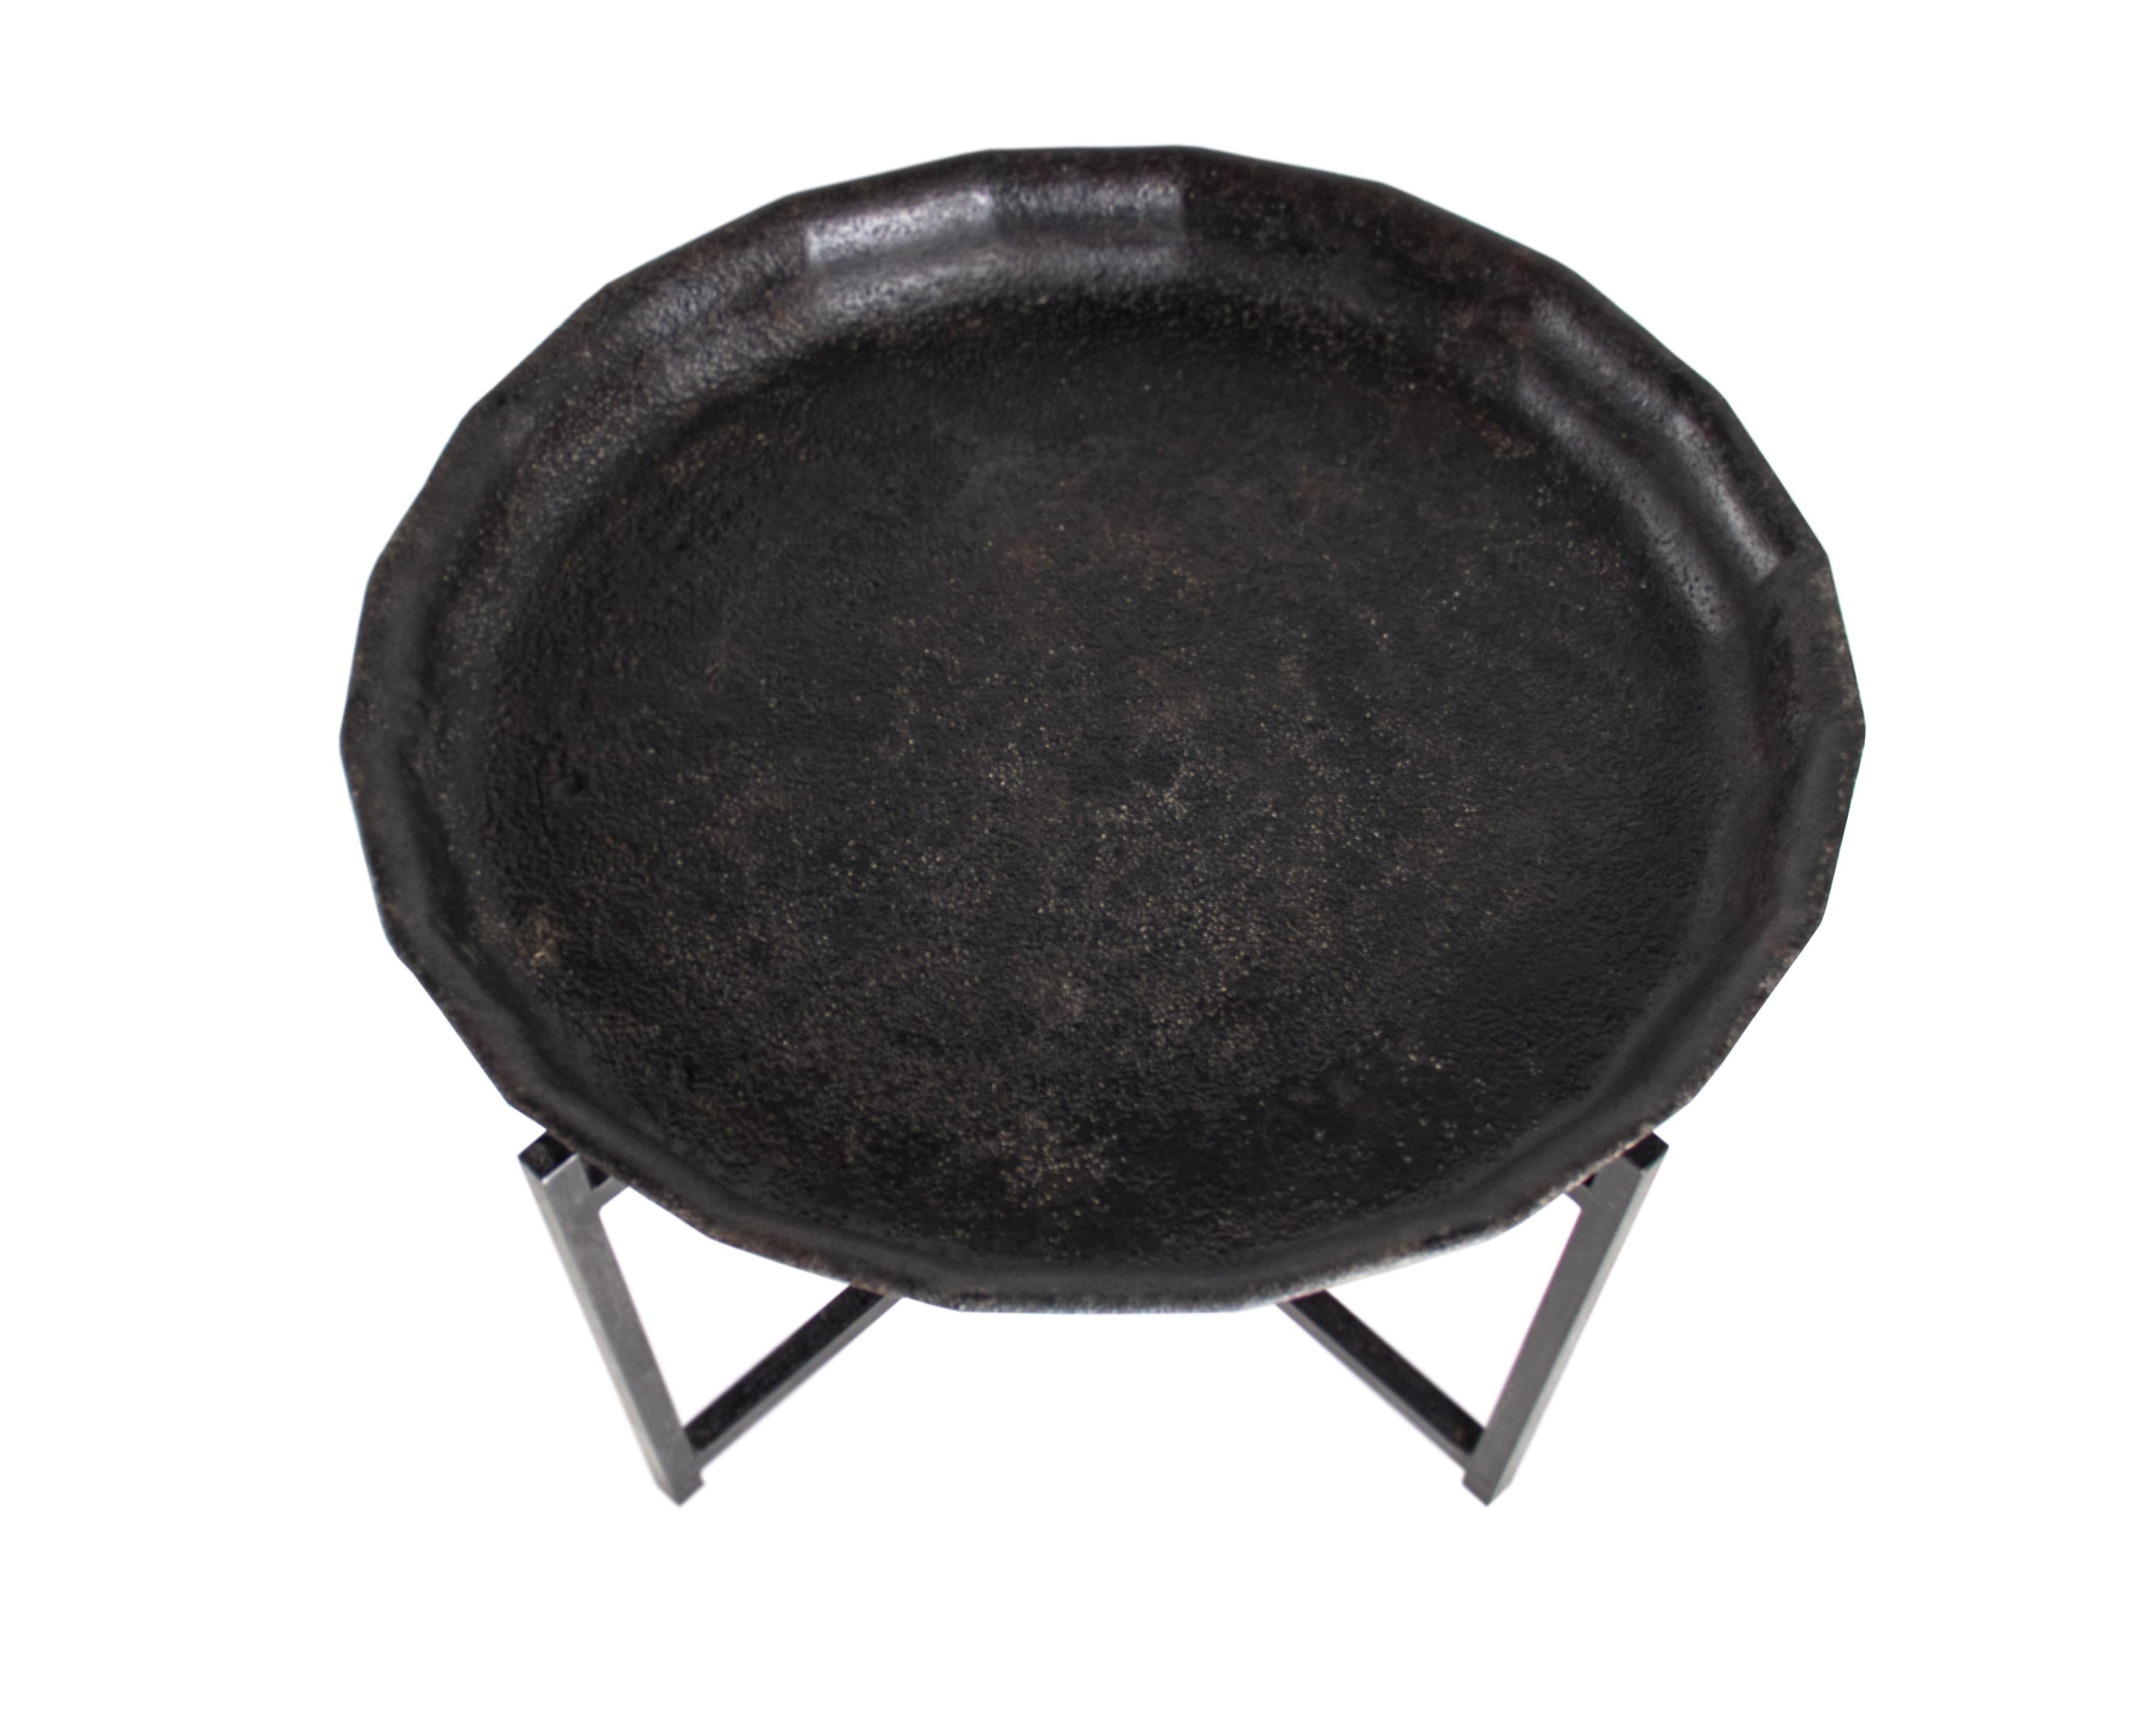 Cast iron fire pit plateau on cast iron geometric stand.

The Harn is an indoor or outdoor furnishing, intended as a side table. 

A part of our Le Monde collection. Exclusive to Brendan bass.